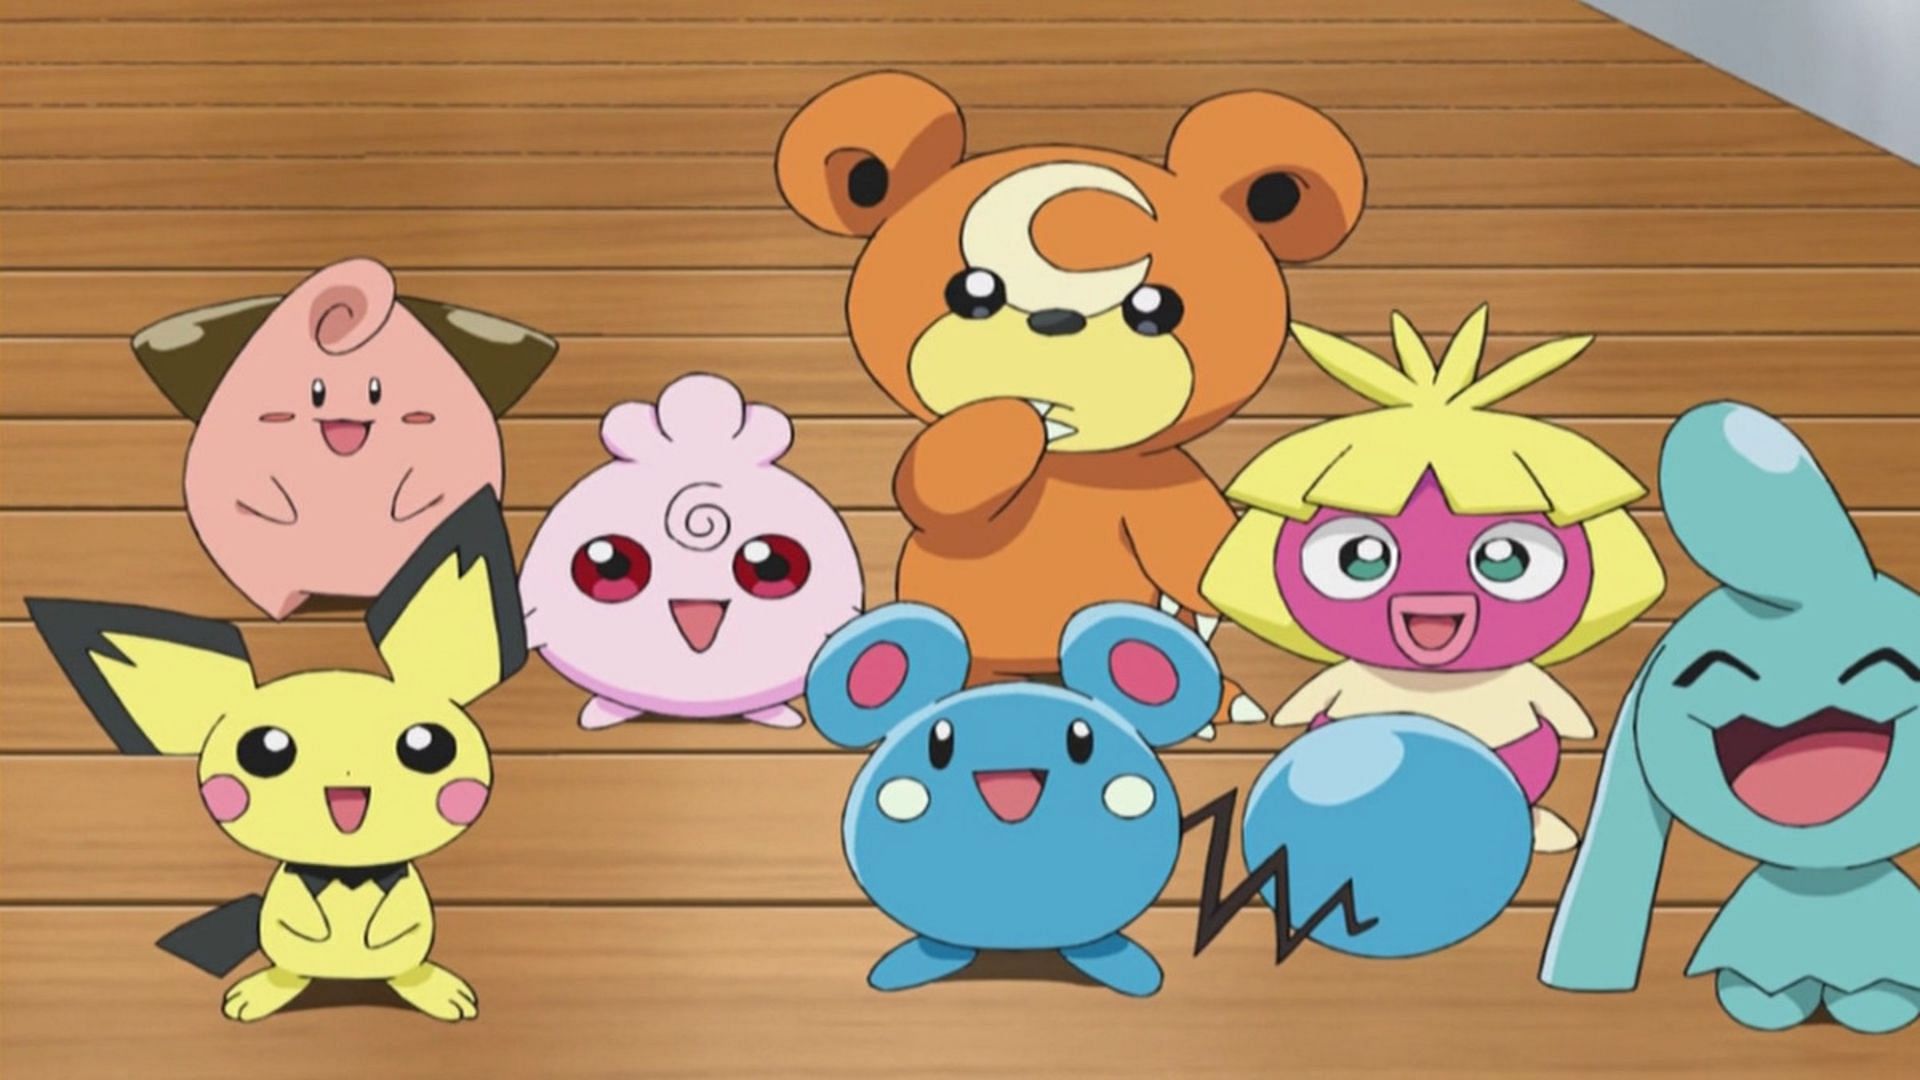 Baby forms were introduced in Generation II (Image via The Pokemon Company)